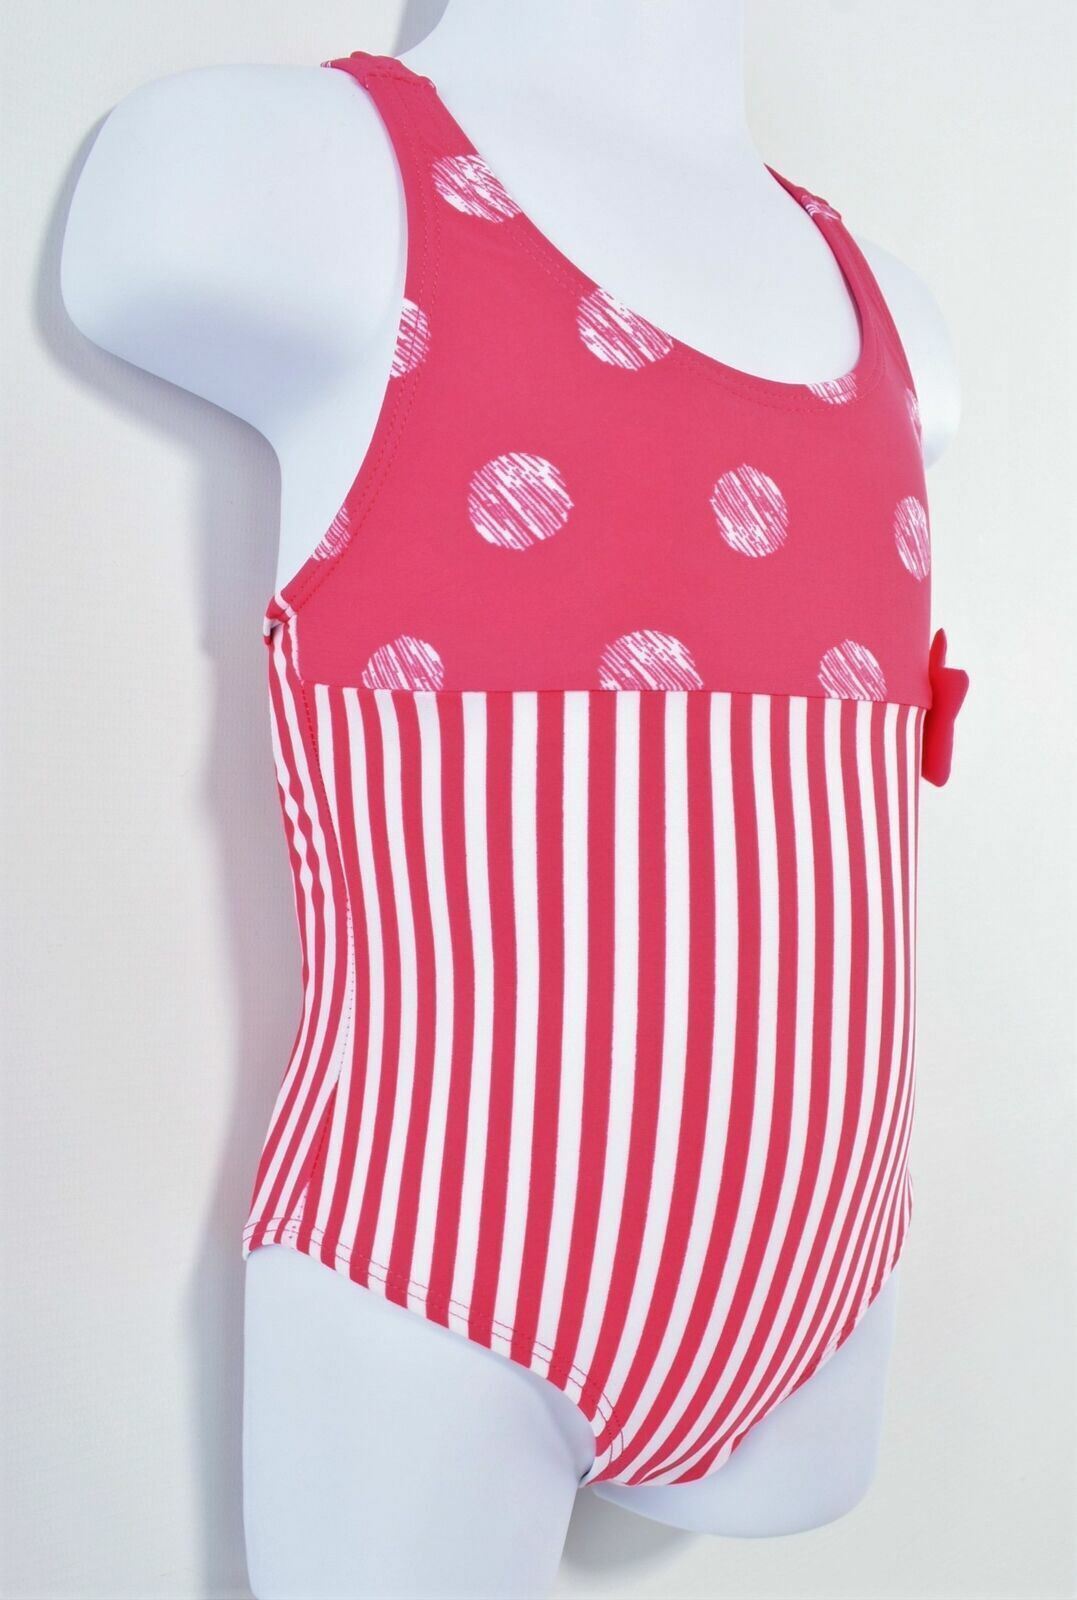 BELLYBUTTON Baby Girls Pink/White Striped One Piece Swimsuit 12 m to 18 months